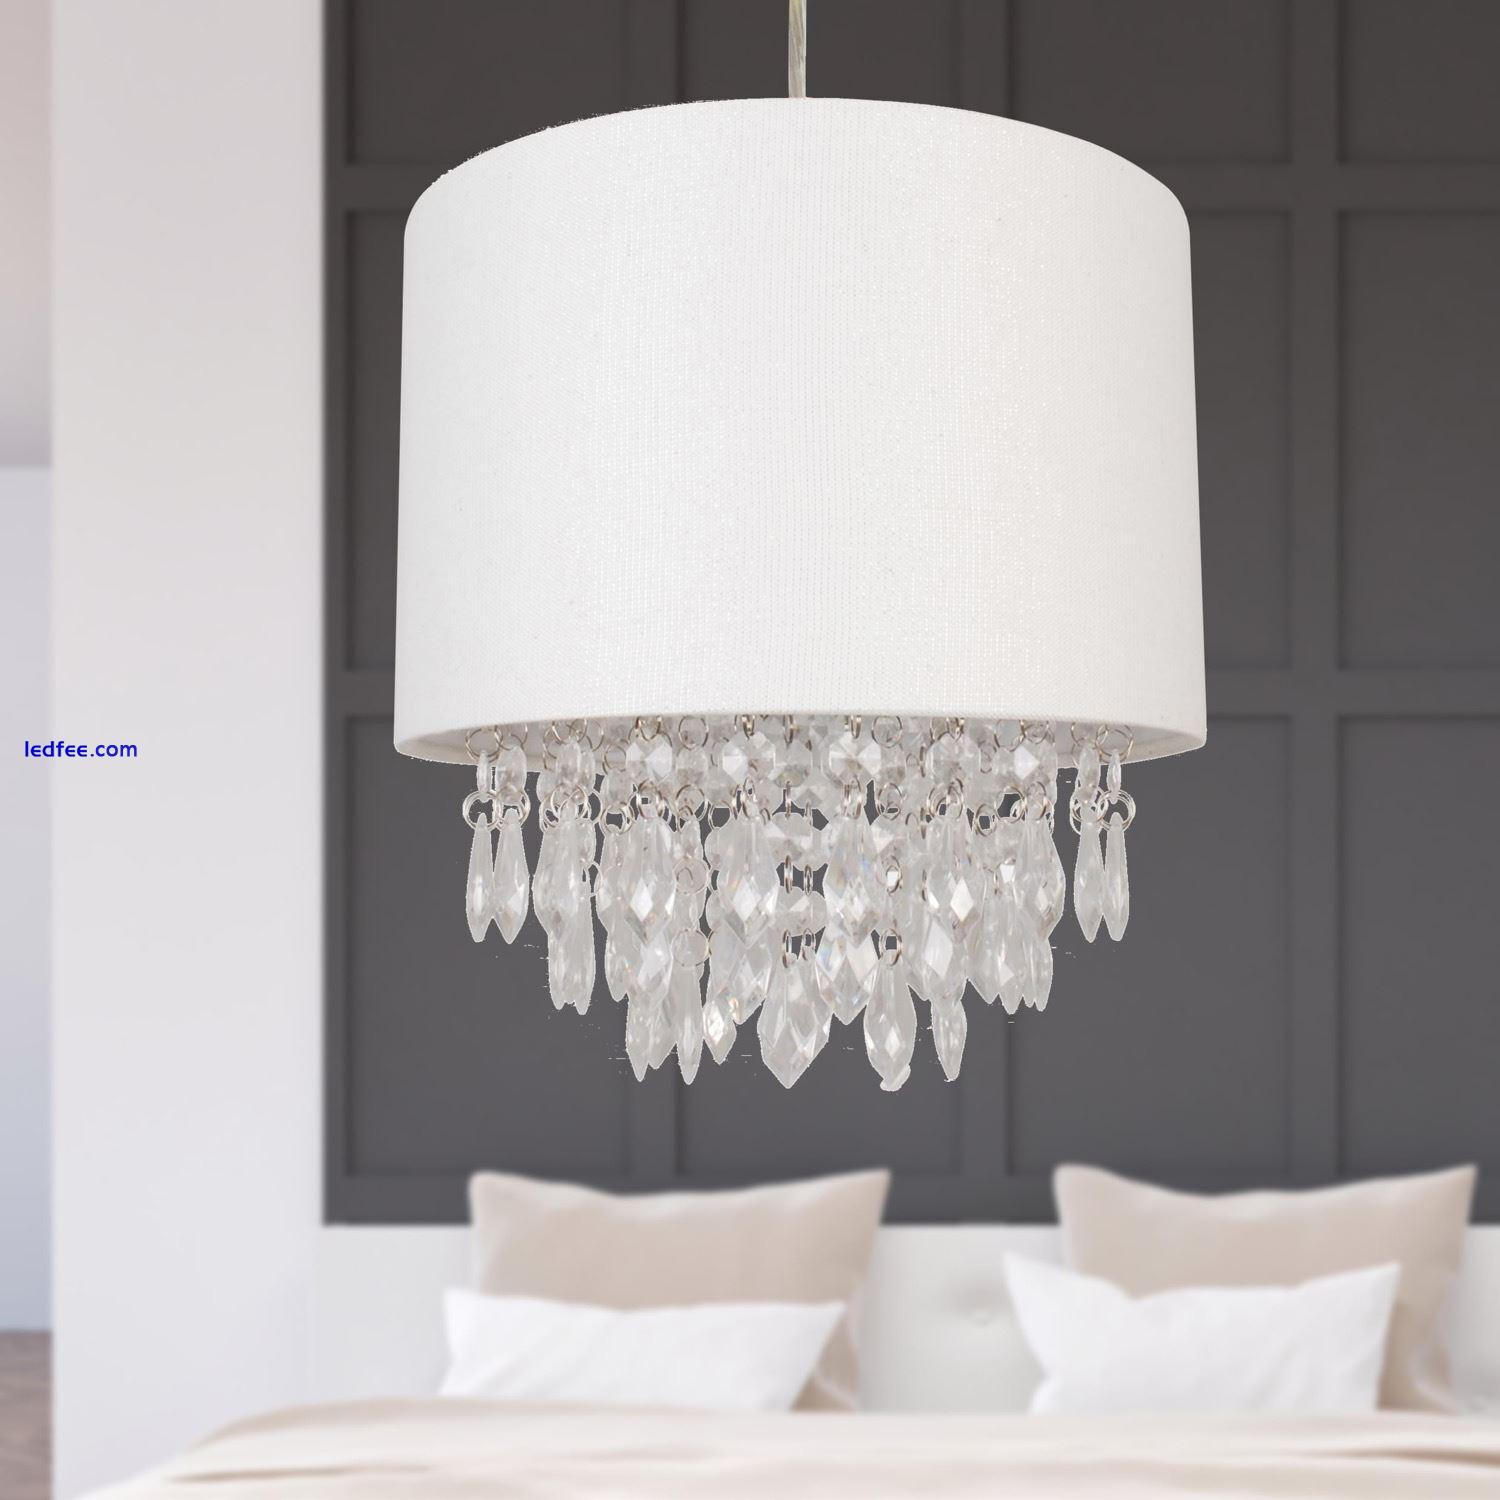 Set of 2 Sparkle Off White 25cm Jewelled Ceiling Lightshades Pendant Shades 4 